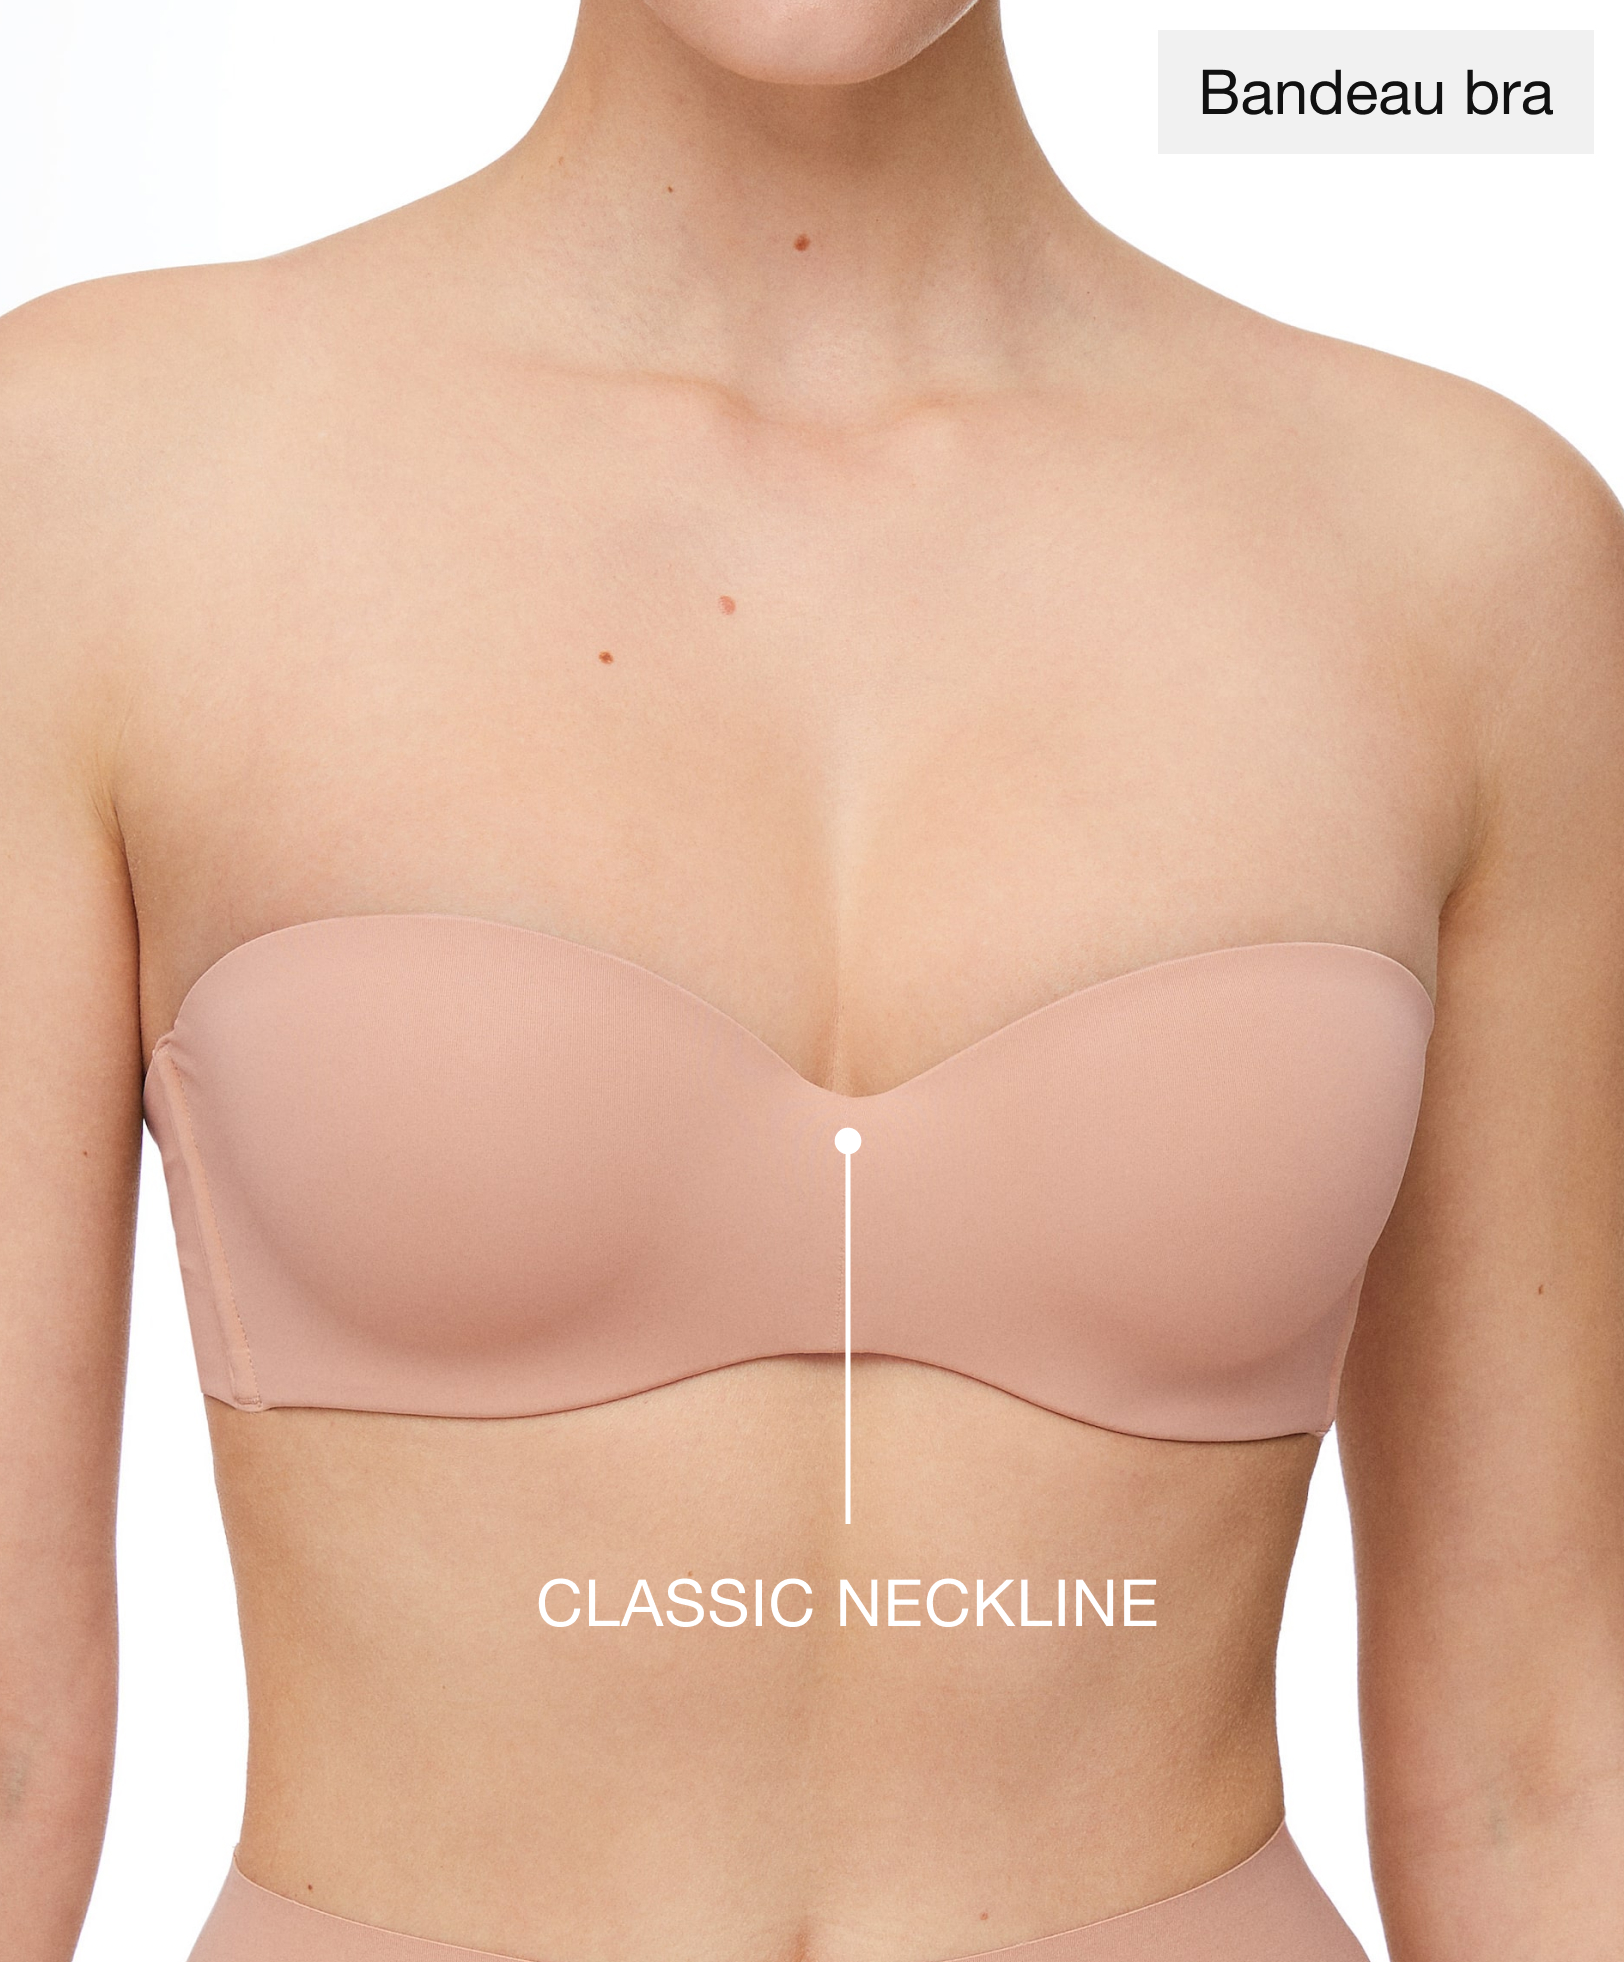 Polyamide bra with removable straps